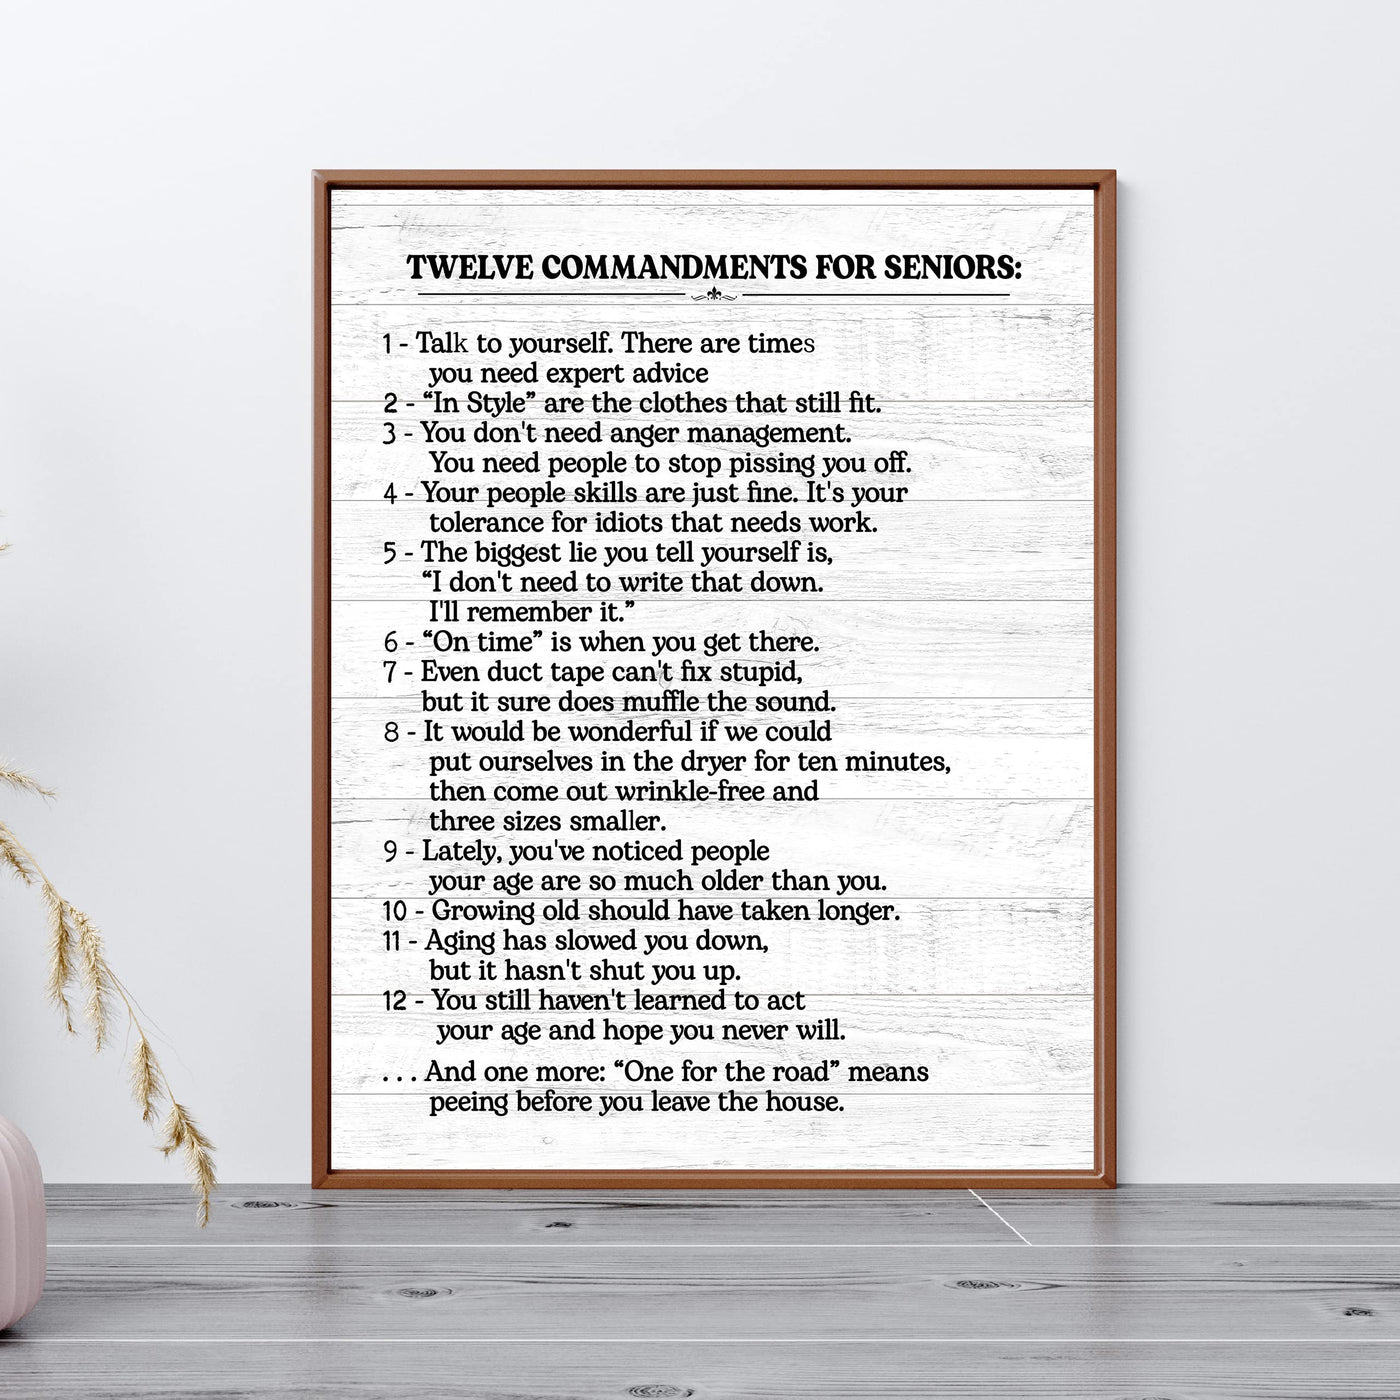 12 Commandments for Seniors Funny Inspirational Quotes -11 x 14" Vintage Sayings Wall Art Print -Ready to Frame. Rustic Wood Design Decor. Home-Kitchen-Office-Patio & Gifts! Printed on Photo Paper.